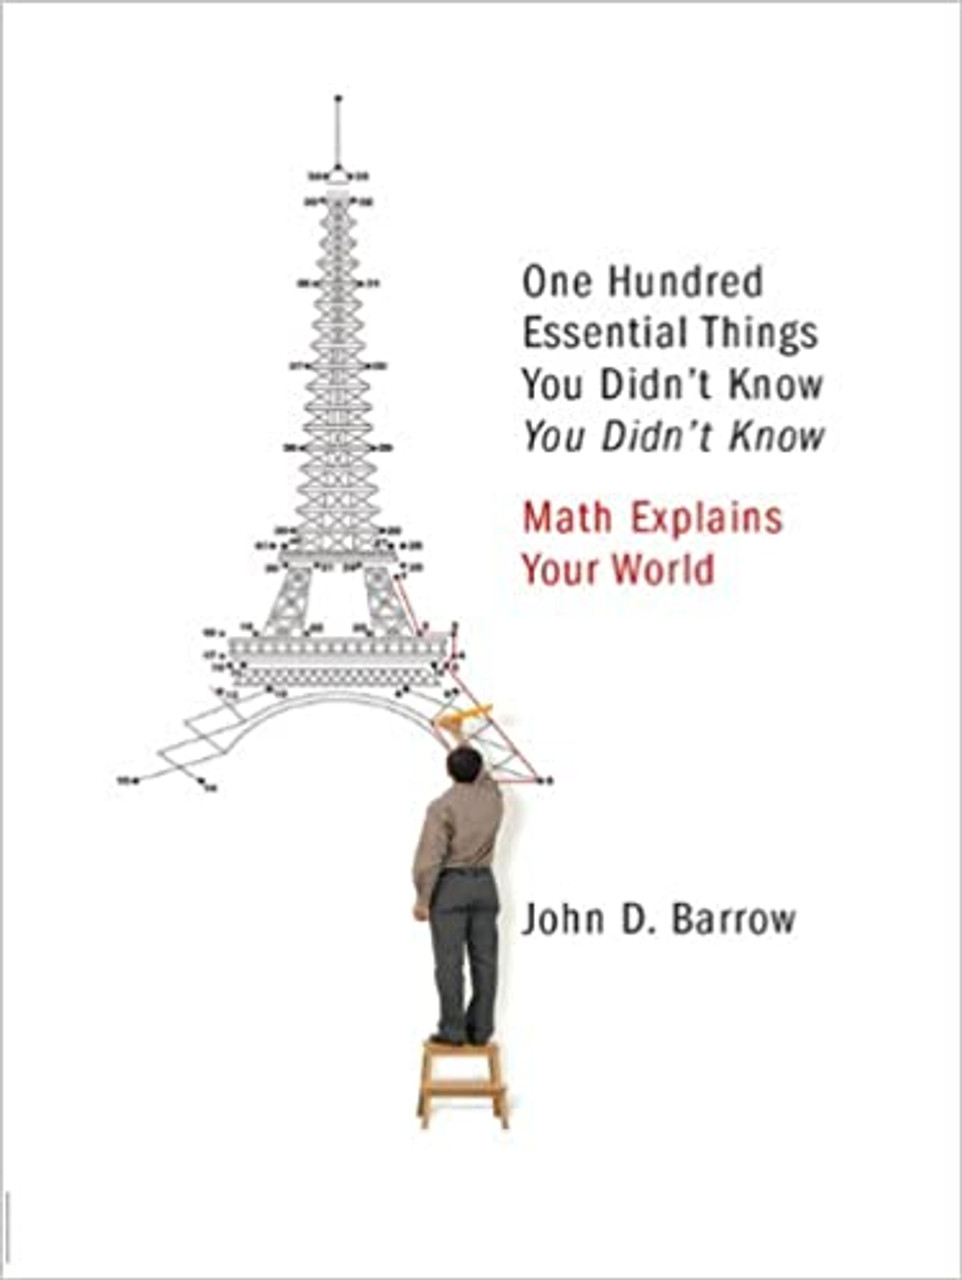 John D. Barrow / 100 Essential Things You Didn't Know You Didn't Know (Hardback)